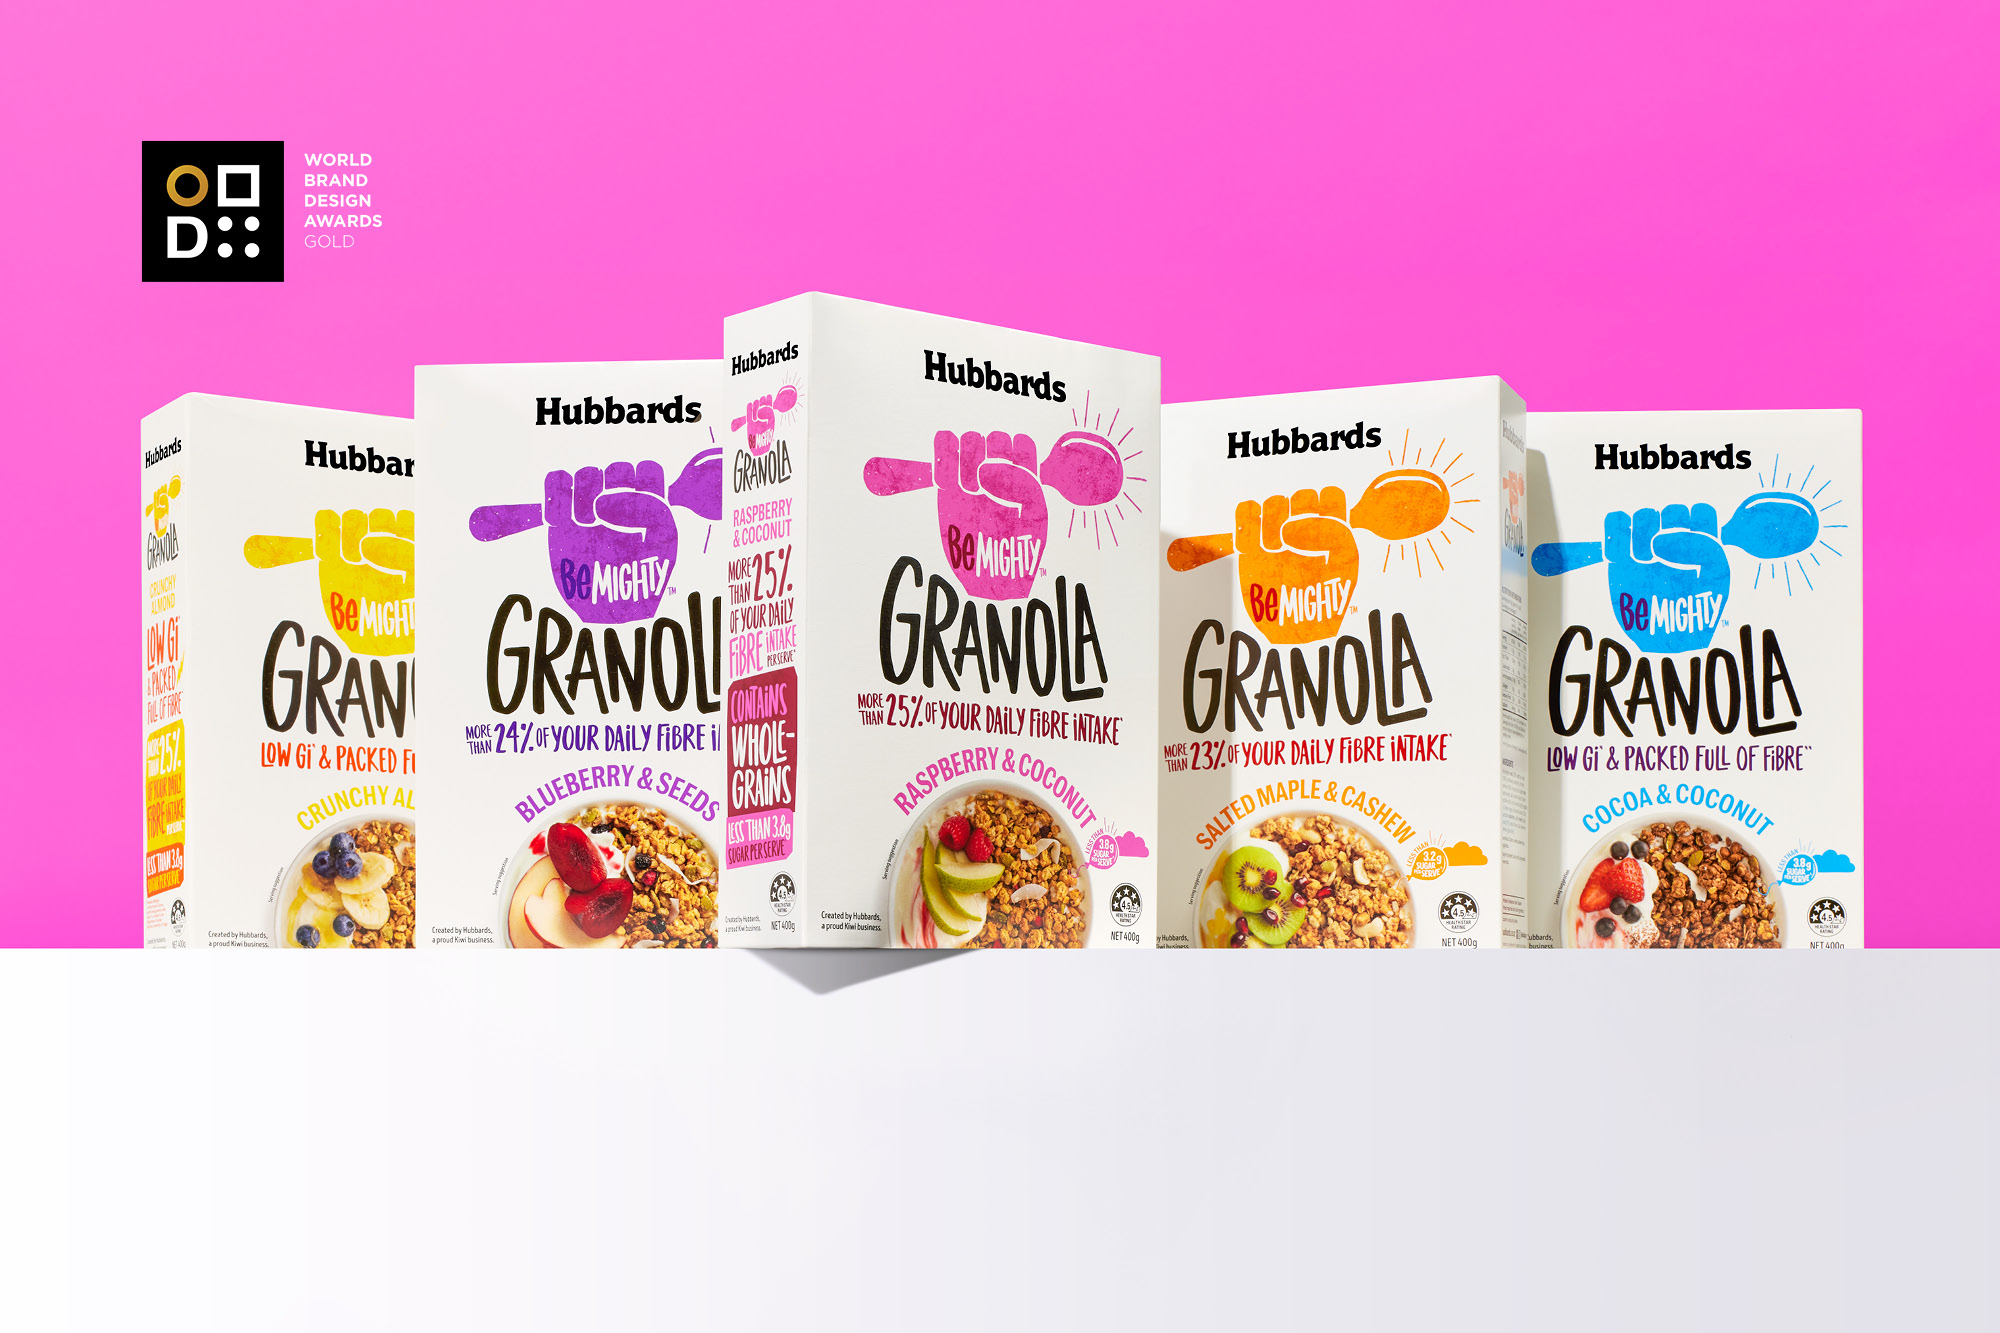 onfire hubbards be mighty granola packaging design awards 3